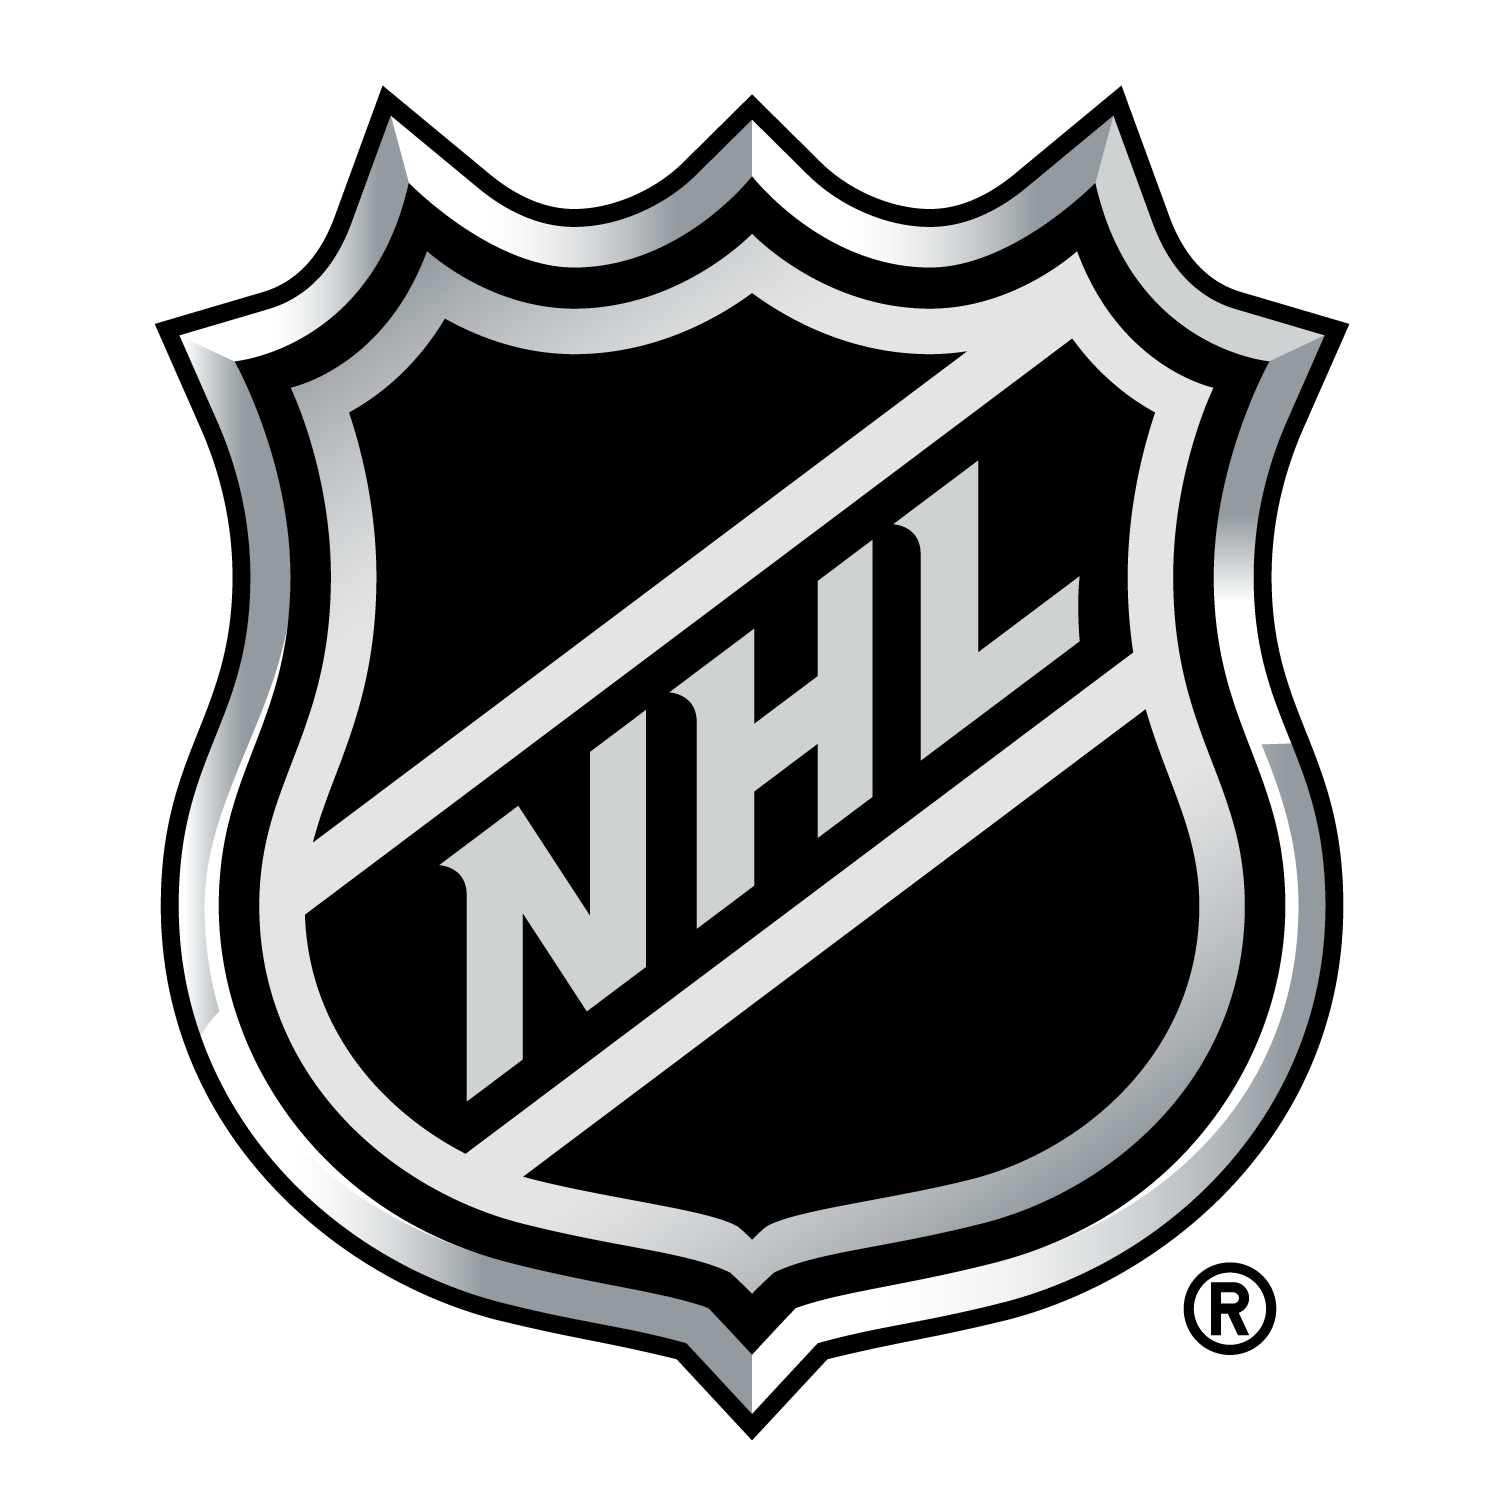 Shop NHL products